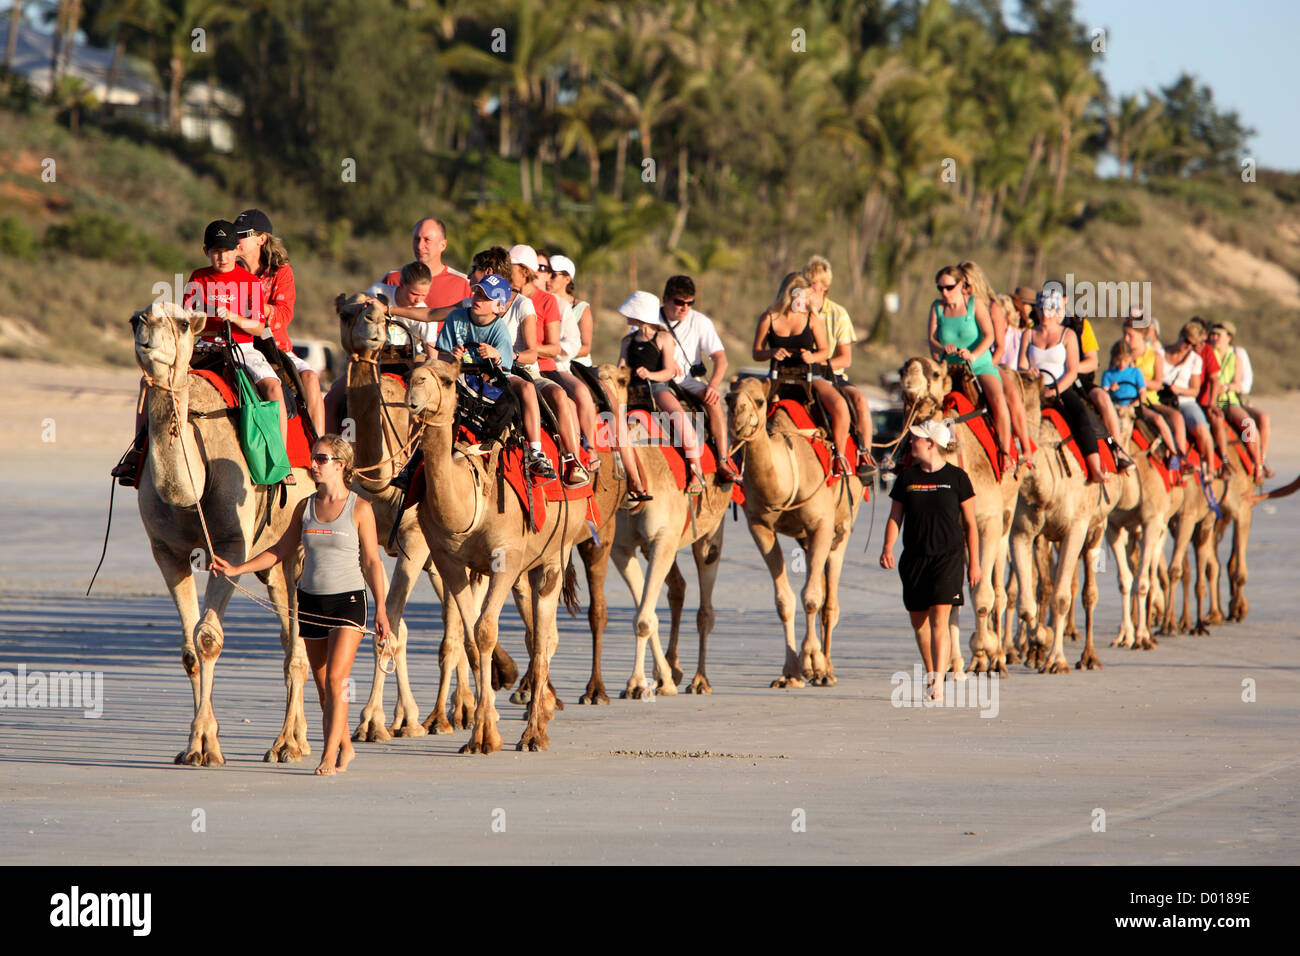 Camel Tour for tourists. Cable Beach, Broome, Western Australia. Stock Photo